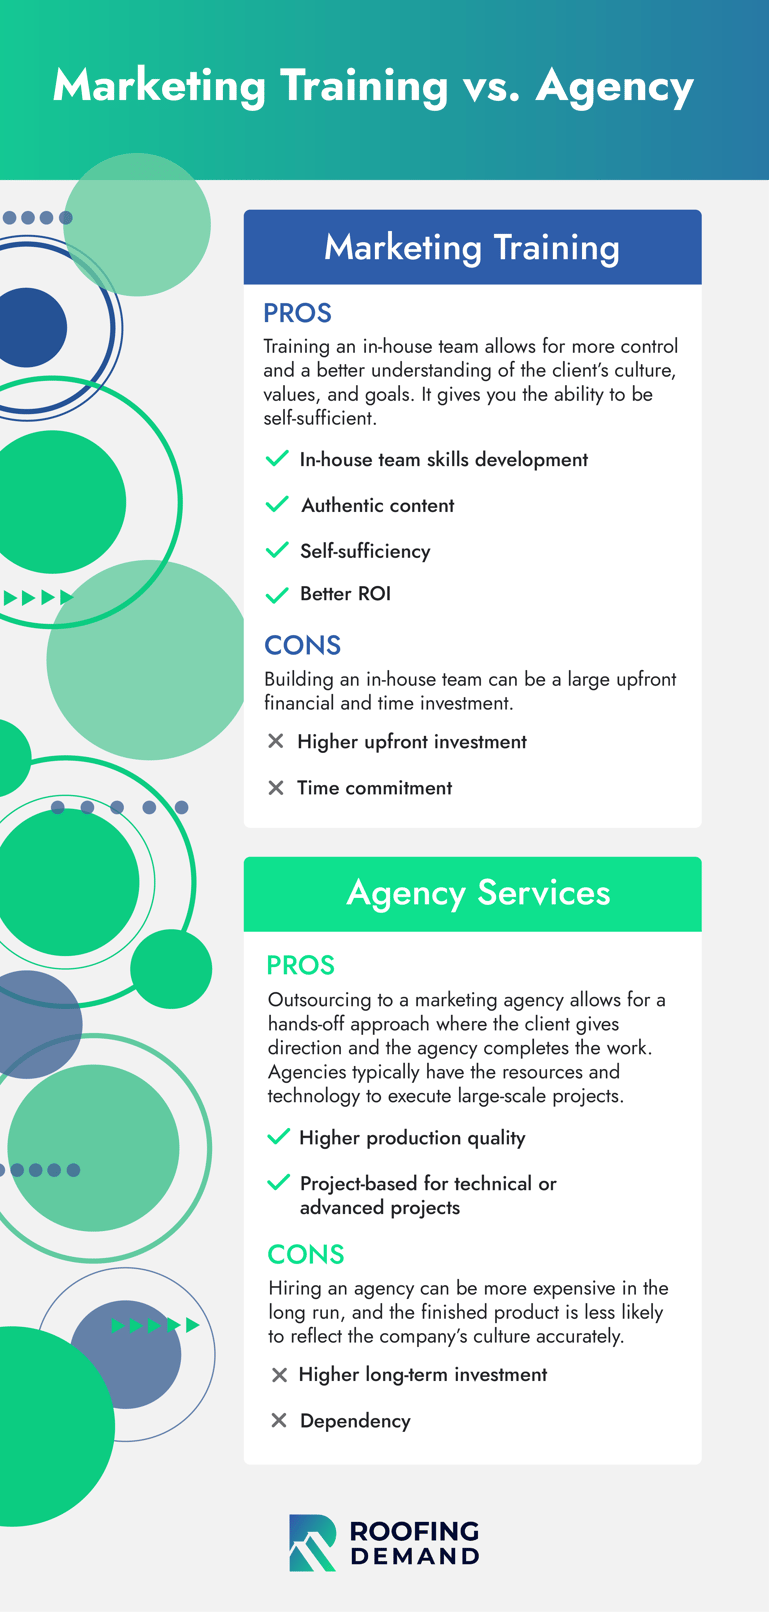 Marketing training vs marketing agency infographic with pros and cons